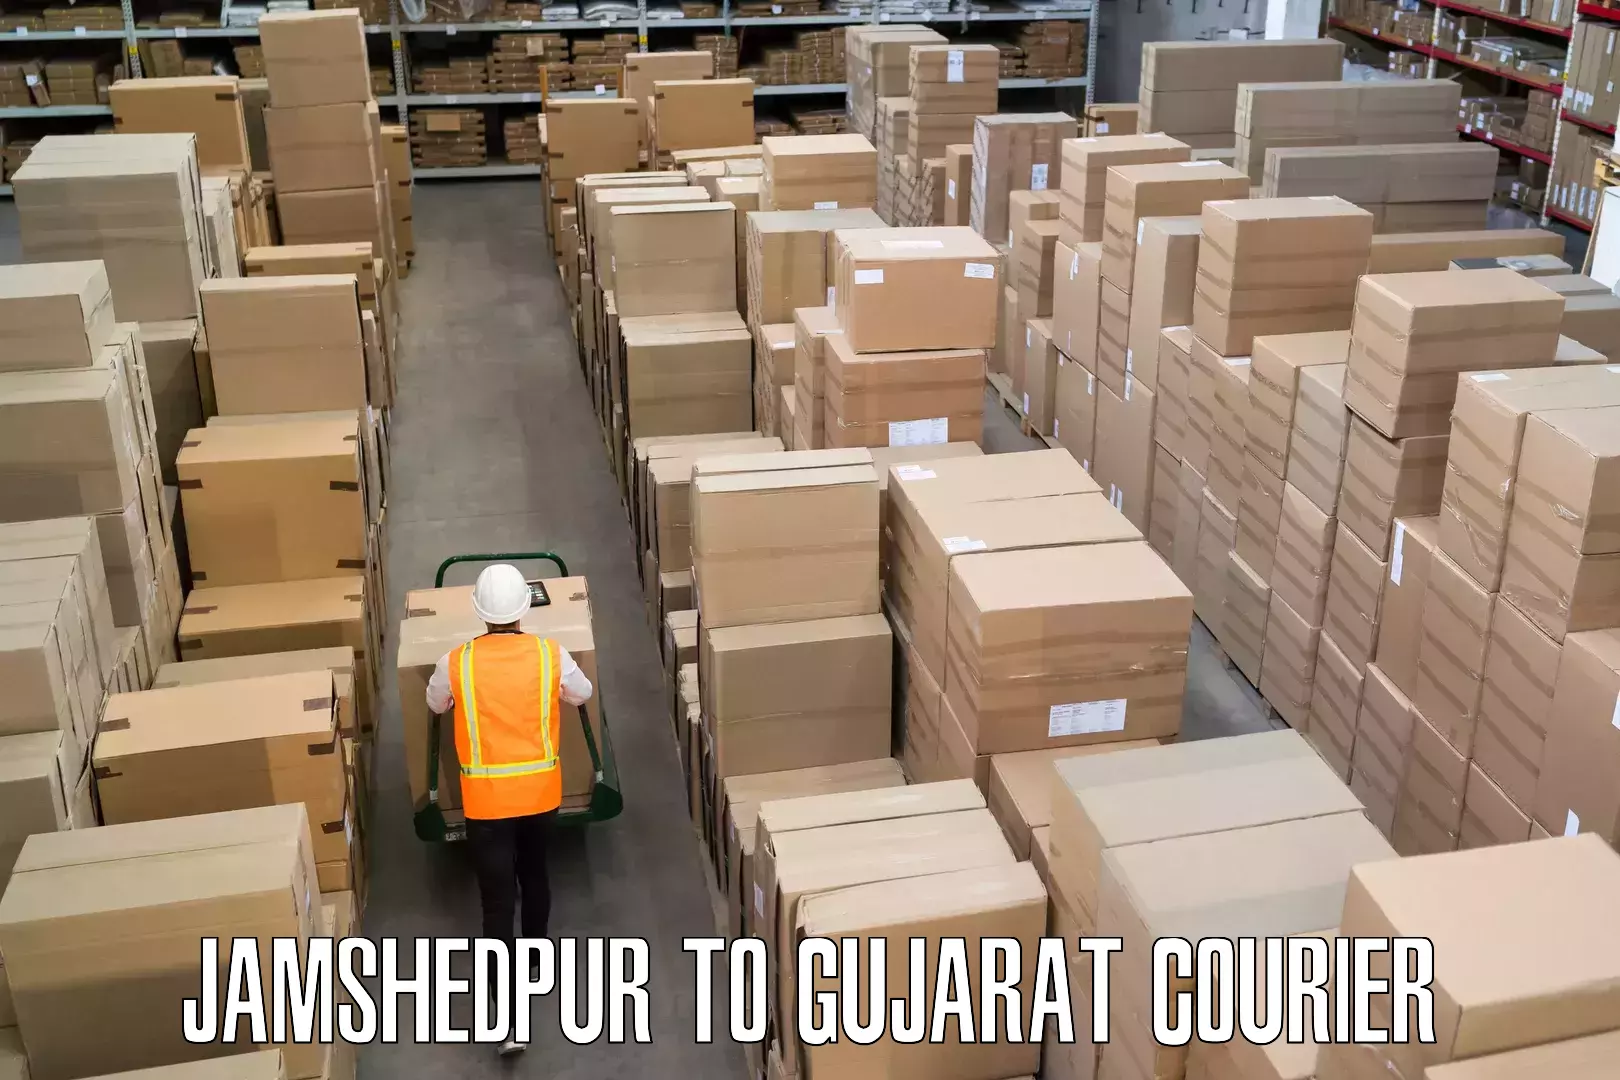 Luggage delivery network Jamshedpur to Gujarat